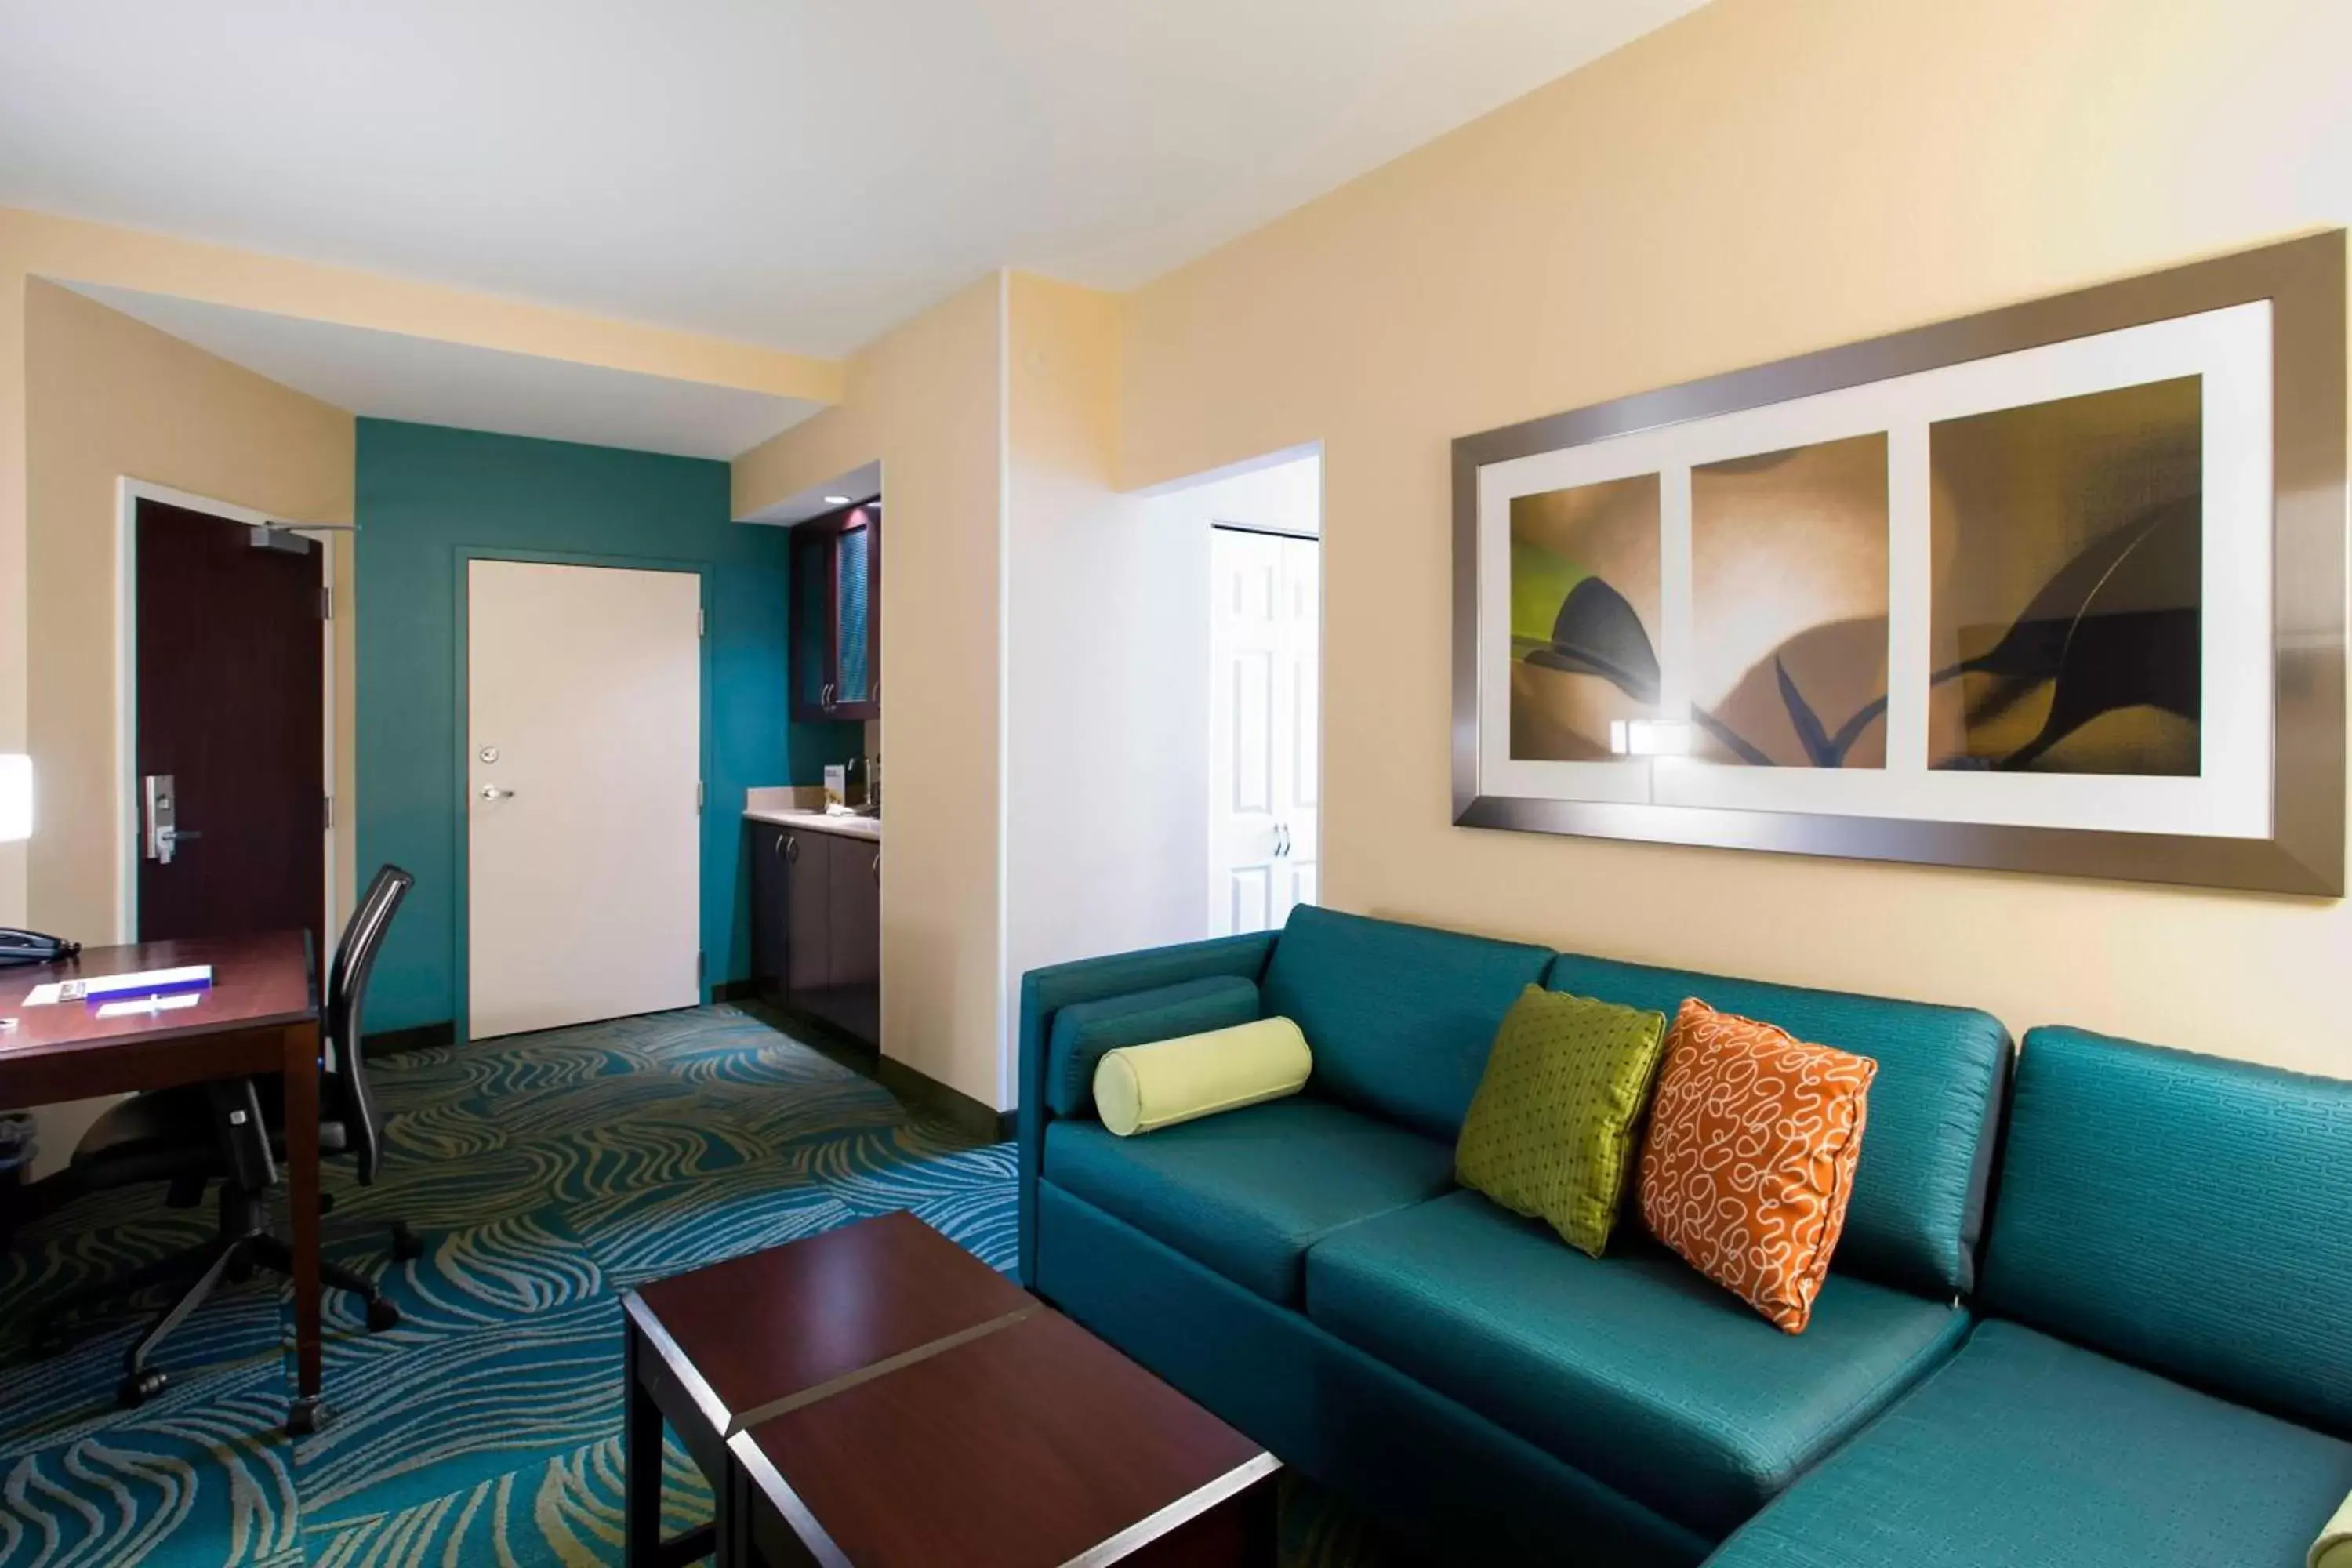 Swimming pool, Seating Area in SpringHill Suites by Marriott Omaha East, Council Bluffs, IA